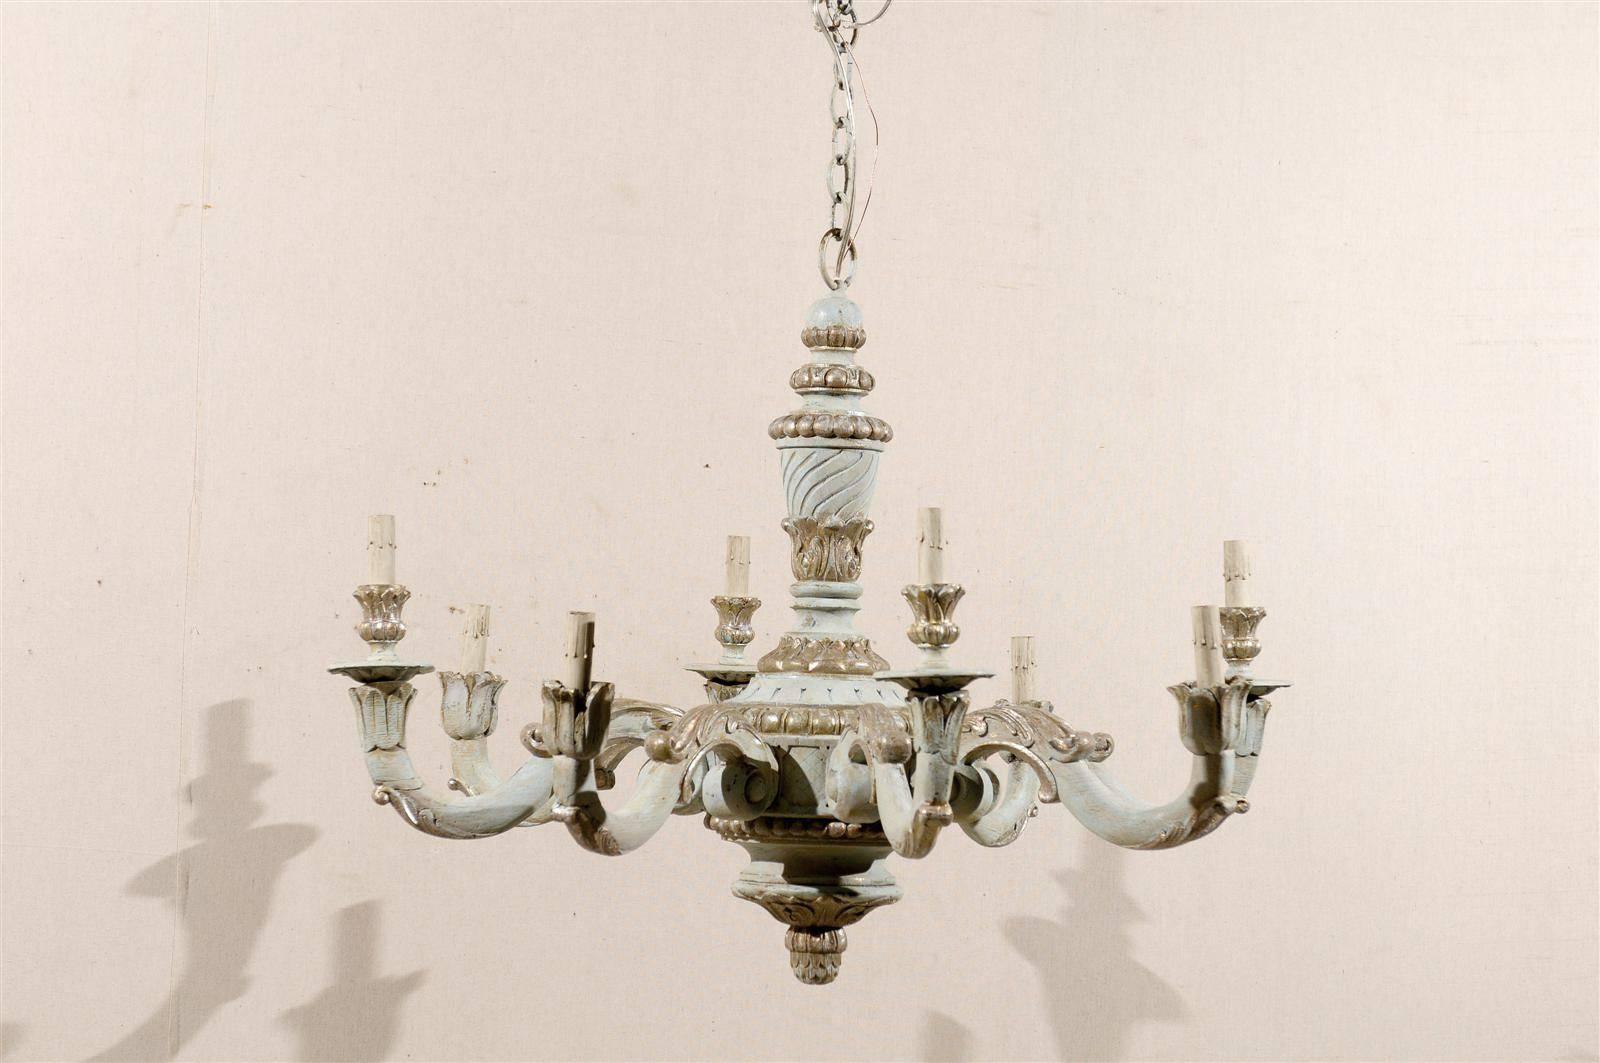 A French richly carved and painted eight-light wooden chandelier of light blue color with silver and slight green accents, nicely carved central column with various motifs such as egg-and-dart, scroll arms with acanthus leaves and delicate flower